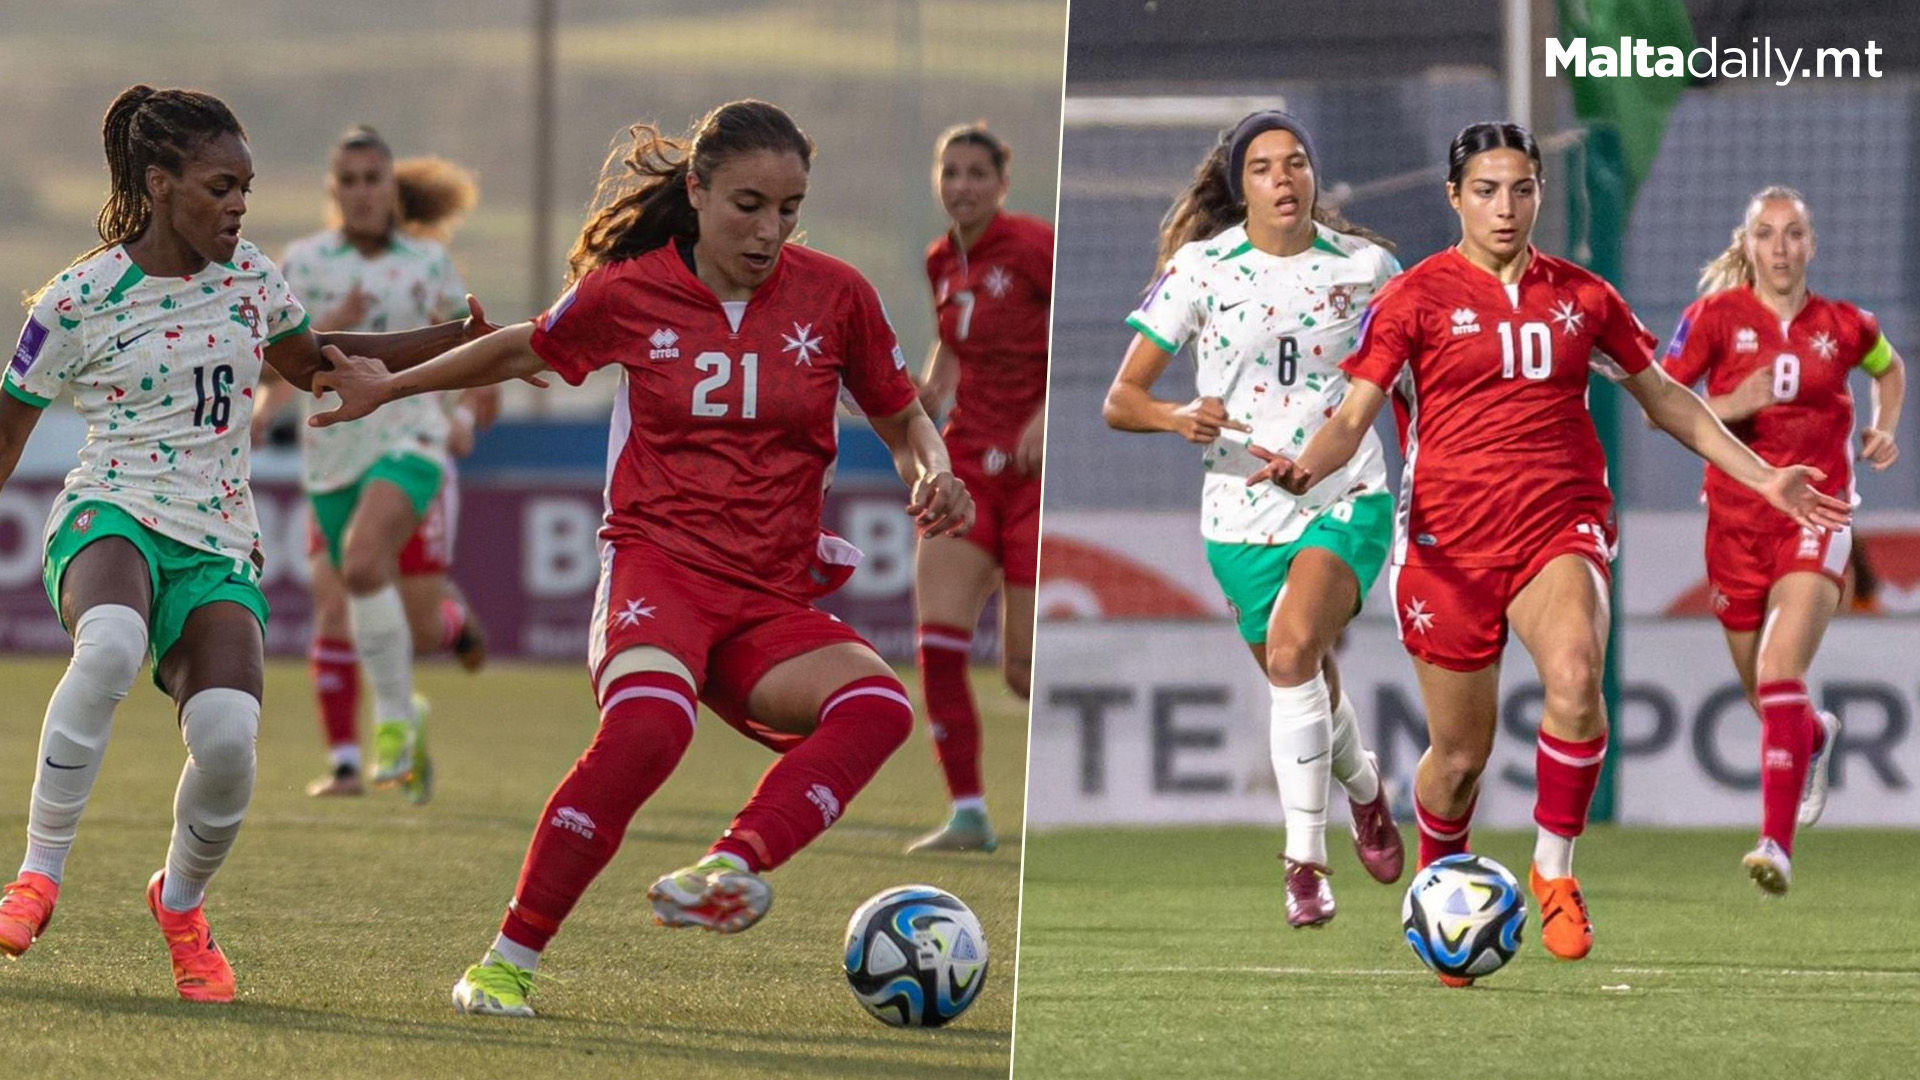 Strong Performance By Malta Despite 0-2 Loss Against Portugal